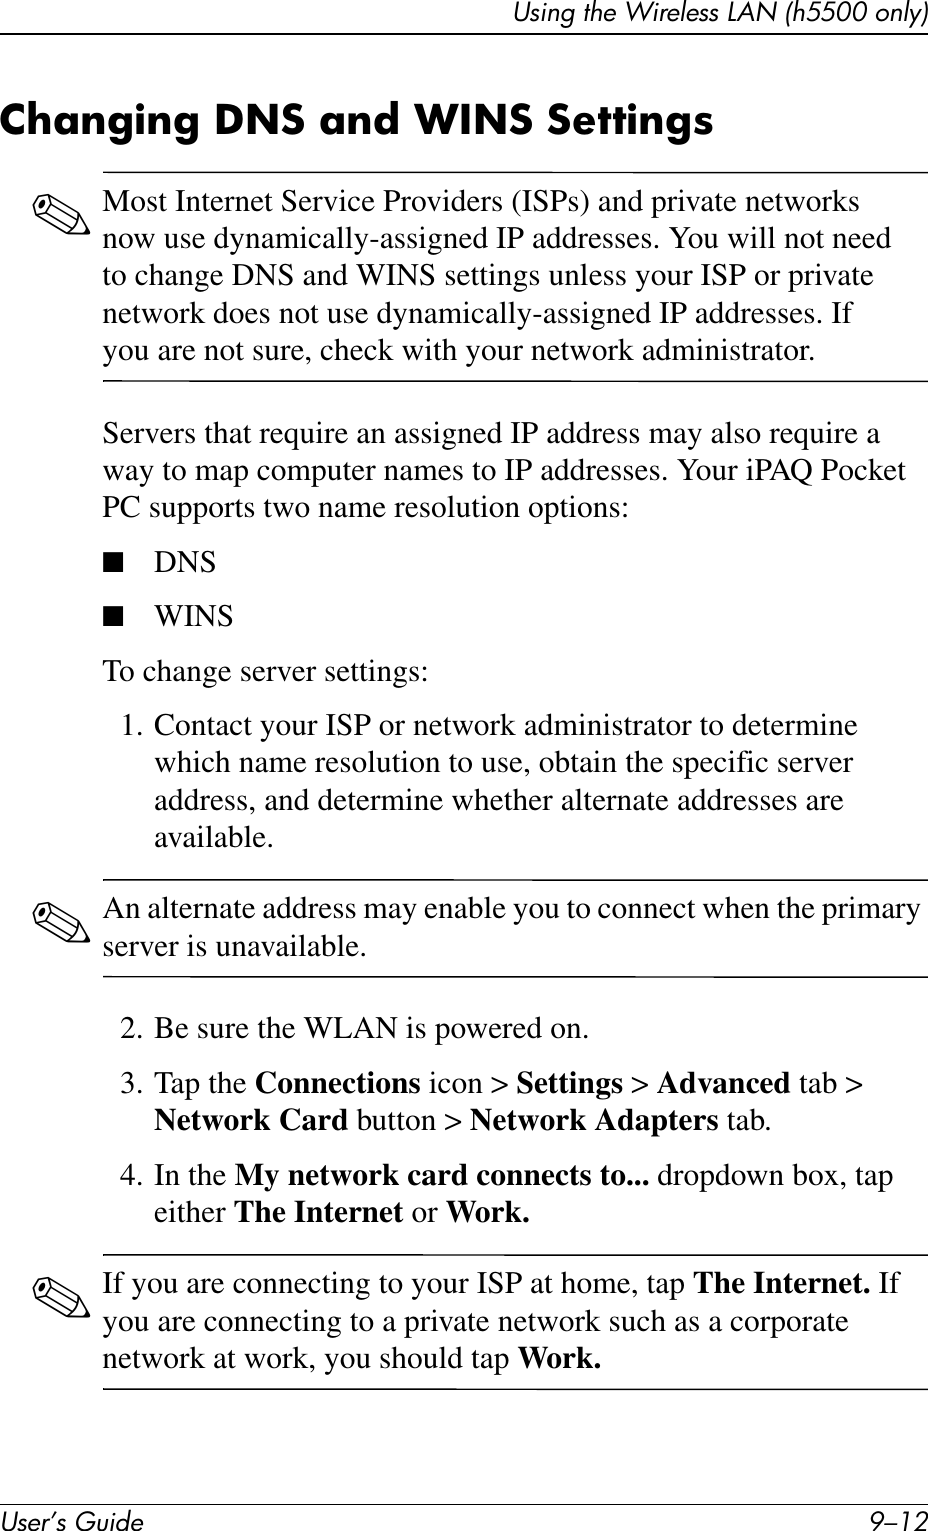 User’s Guide 9–12Using the Wireless LAN (h5500 only)Changing DNS and WINS Settings✎Most Internet Service Providers (ISPs) and private networks now use dynamically-assigned IP addresses. You will not need to change DNS and WINS settings unless your ISP or private network does not use dynamically-assigned IP addresses. If you are not sure, check with your network administrator.Servers that require an assigned IP address may also require a way to map computer names to IP addresses. Your iPAQ Pocket PC supports two name resolution options:■DNS■WINSTo change server settings:1. Contact your ISP or network administrator to determine which name resolution to use, obtain the specific server address, and determine whether alternate addresses are available.✎An alternate address may enable you to connect when the primary server is unavailable.2. Be sure the WLAN is powered on.3. Tap the Connections icon &gt; Settings &gt; Advanced tab &gt; Network Card button &gt; Network Adapters tab.4. In the My network card connects to... dropdown box, tap either The Internet or Work.✎If you are connecting to your ISP at home, tap The Internet. If you are connecting to a private network such as a corporate network at work, you should tap Work.